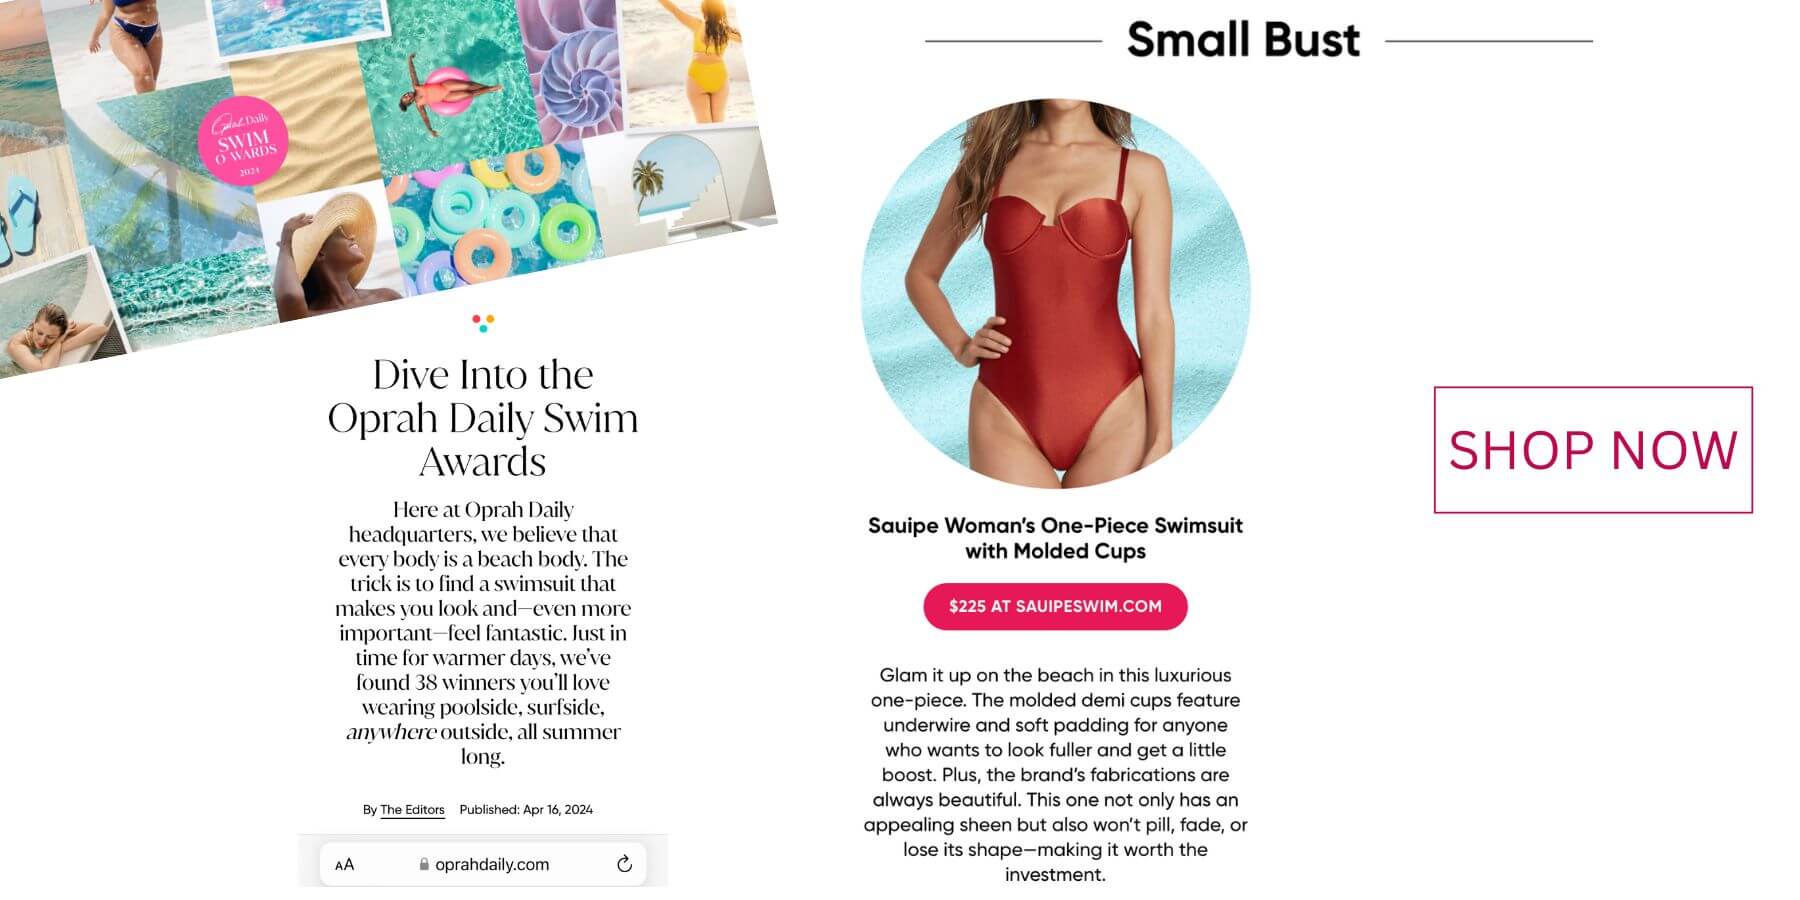 The Victoria one piece swimsuit was awarded the best one piece swimsuit for small bust by Oprah Daily.